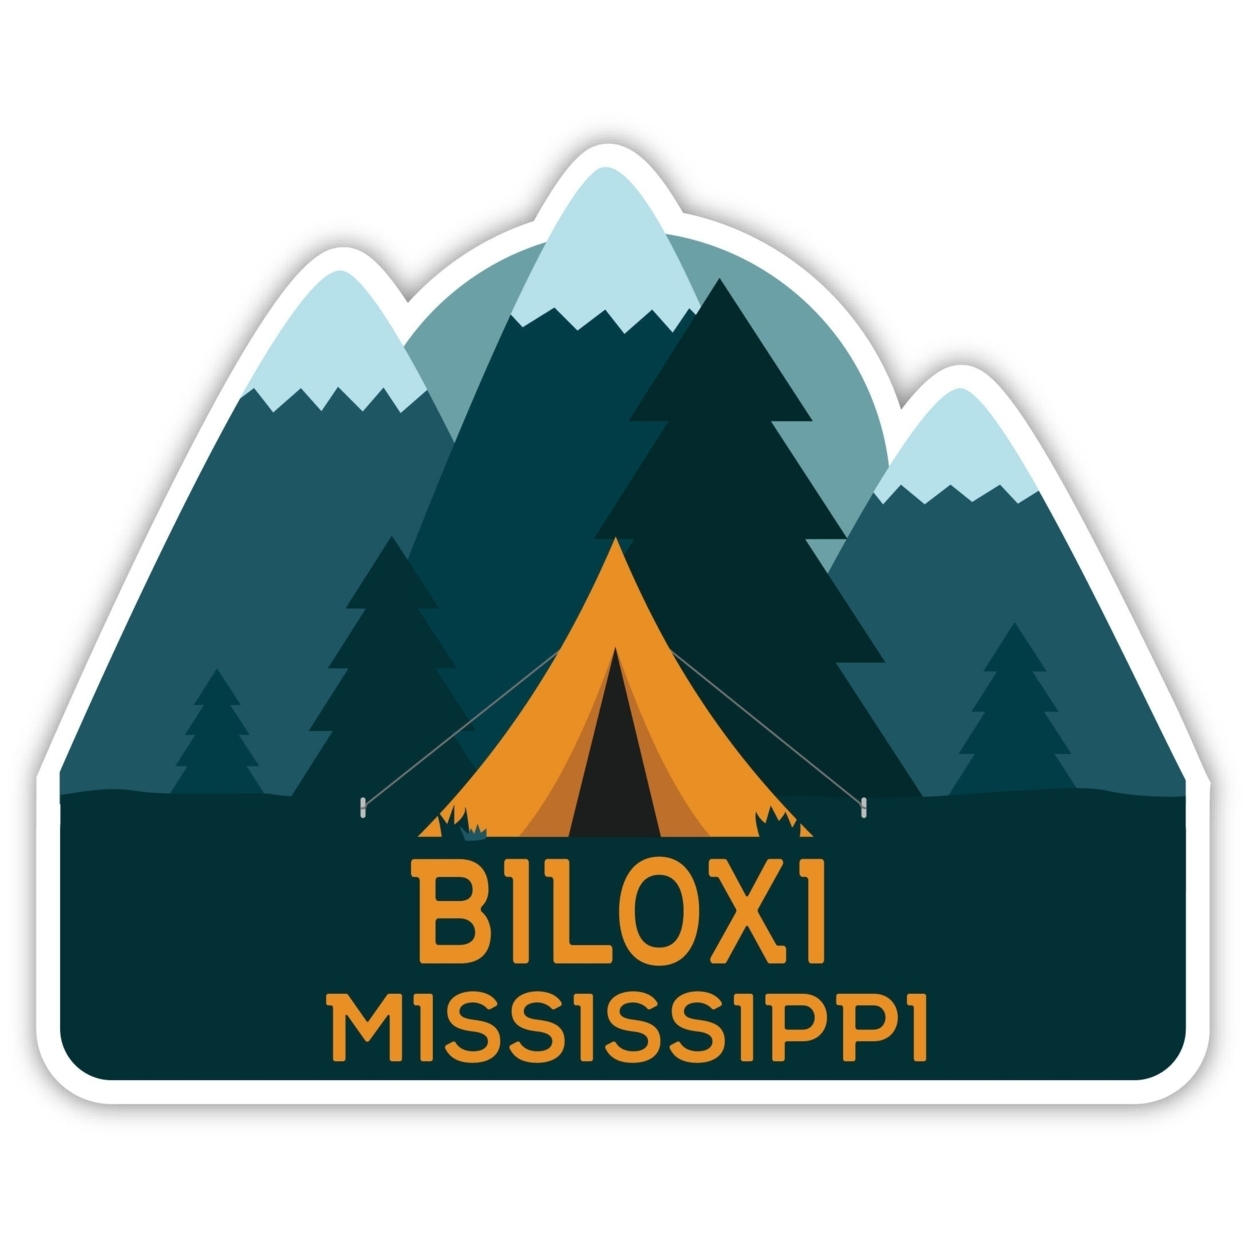 Biloxi Mississippi Souvenir Decorative Stickers (Choose Theme And Size) - 4-Pack, 10-Inch, Bear